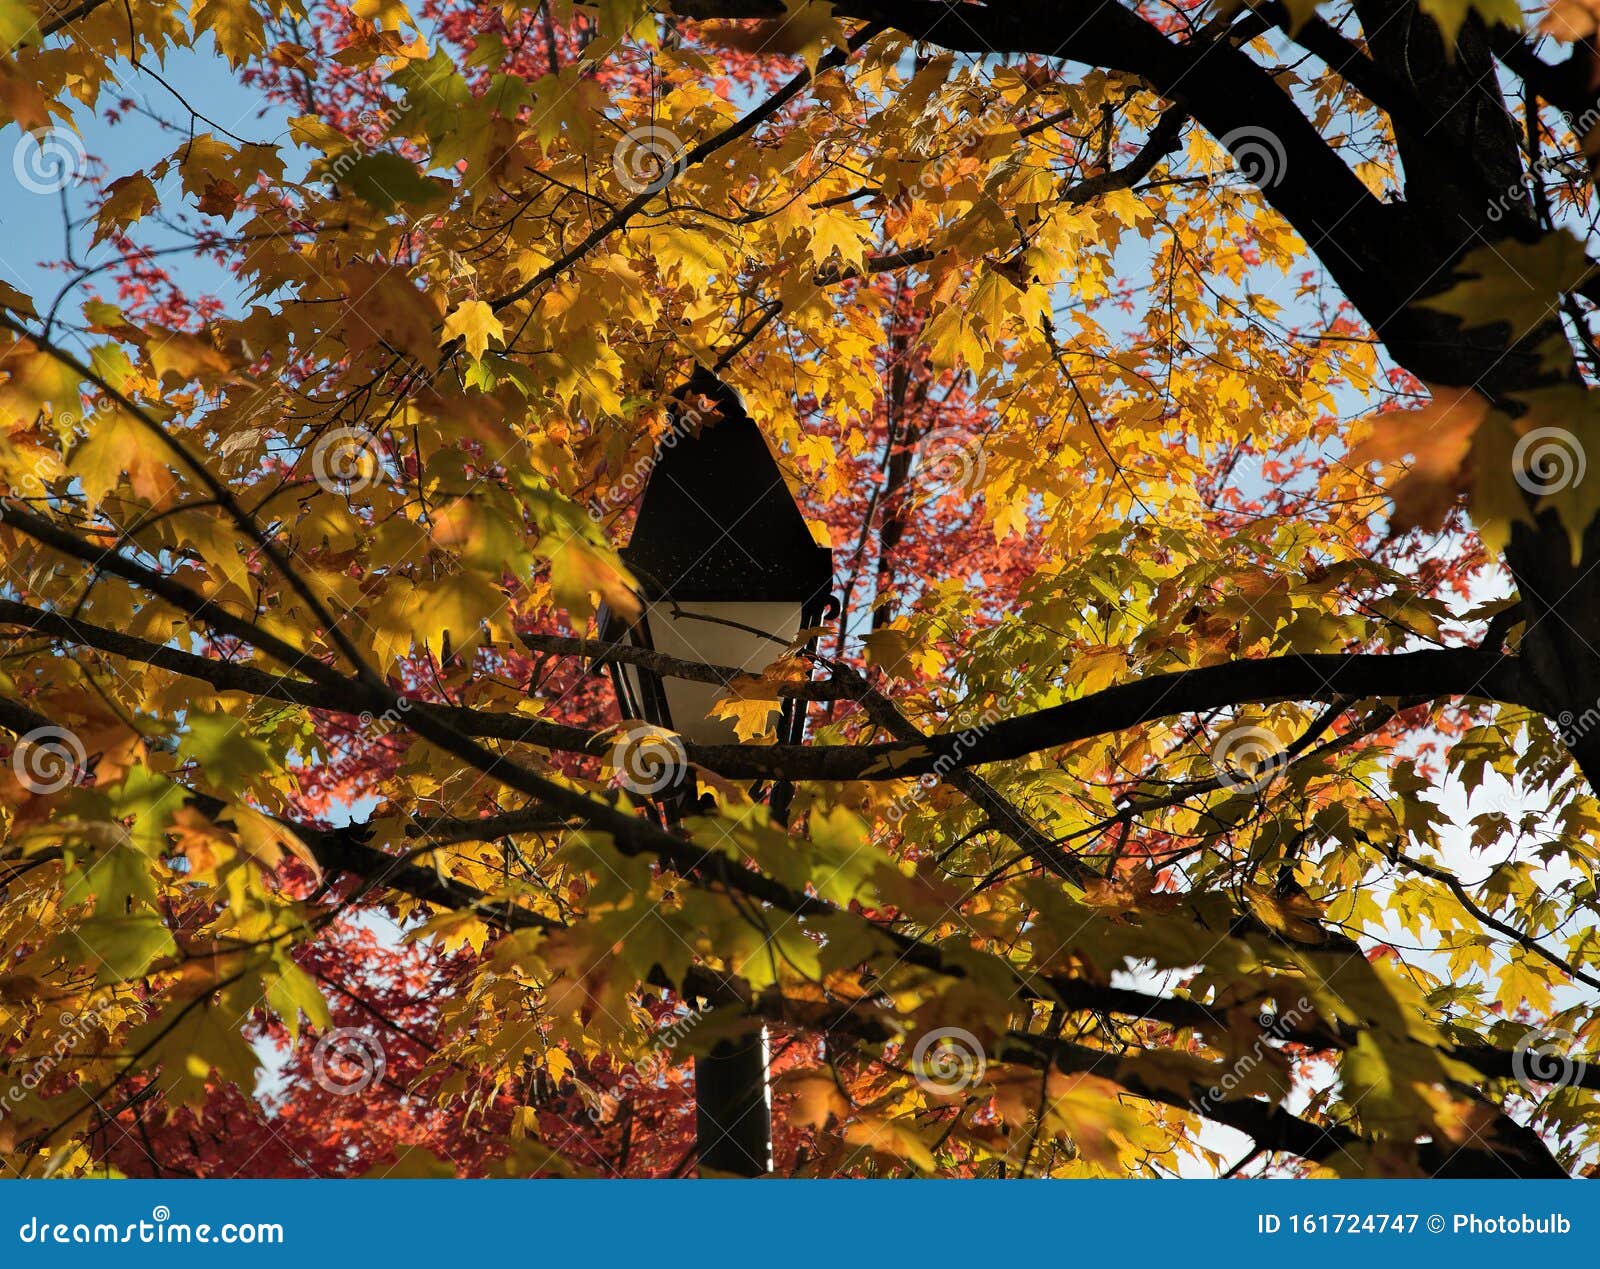 Lamppost Amidst Autumn Leaves in Upstate New York Stock Image - Image